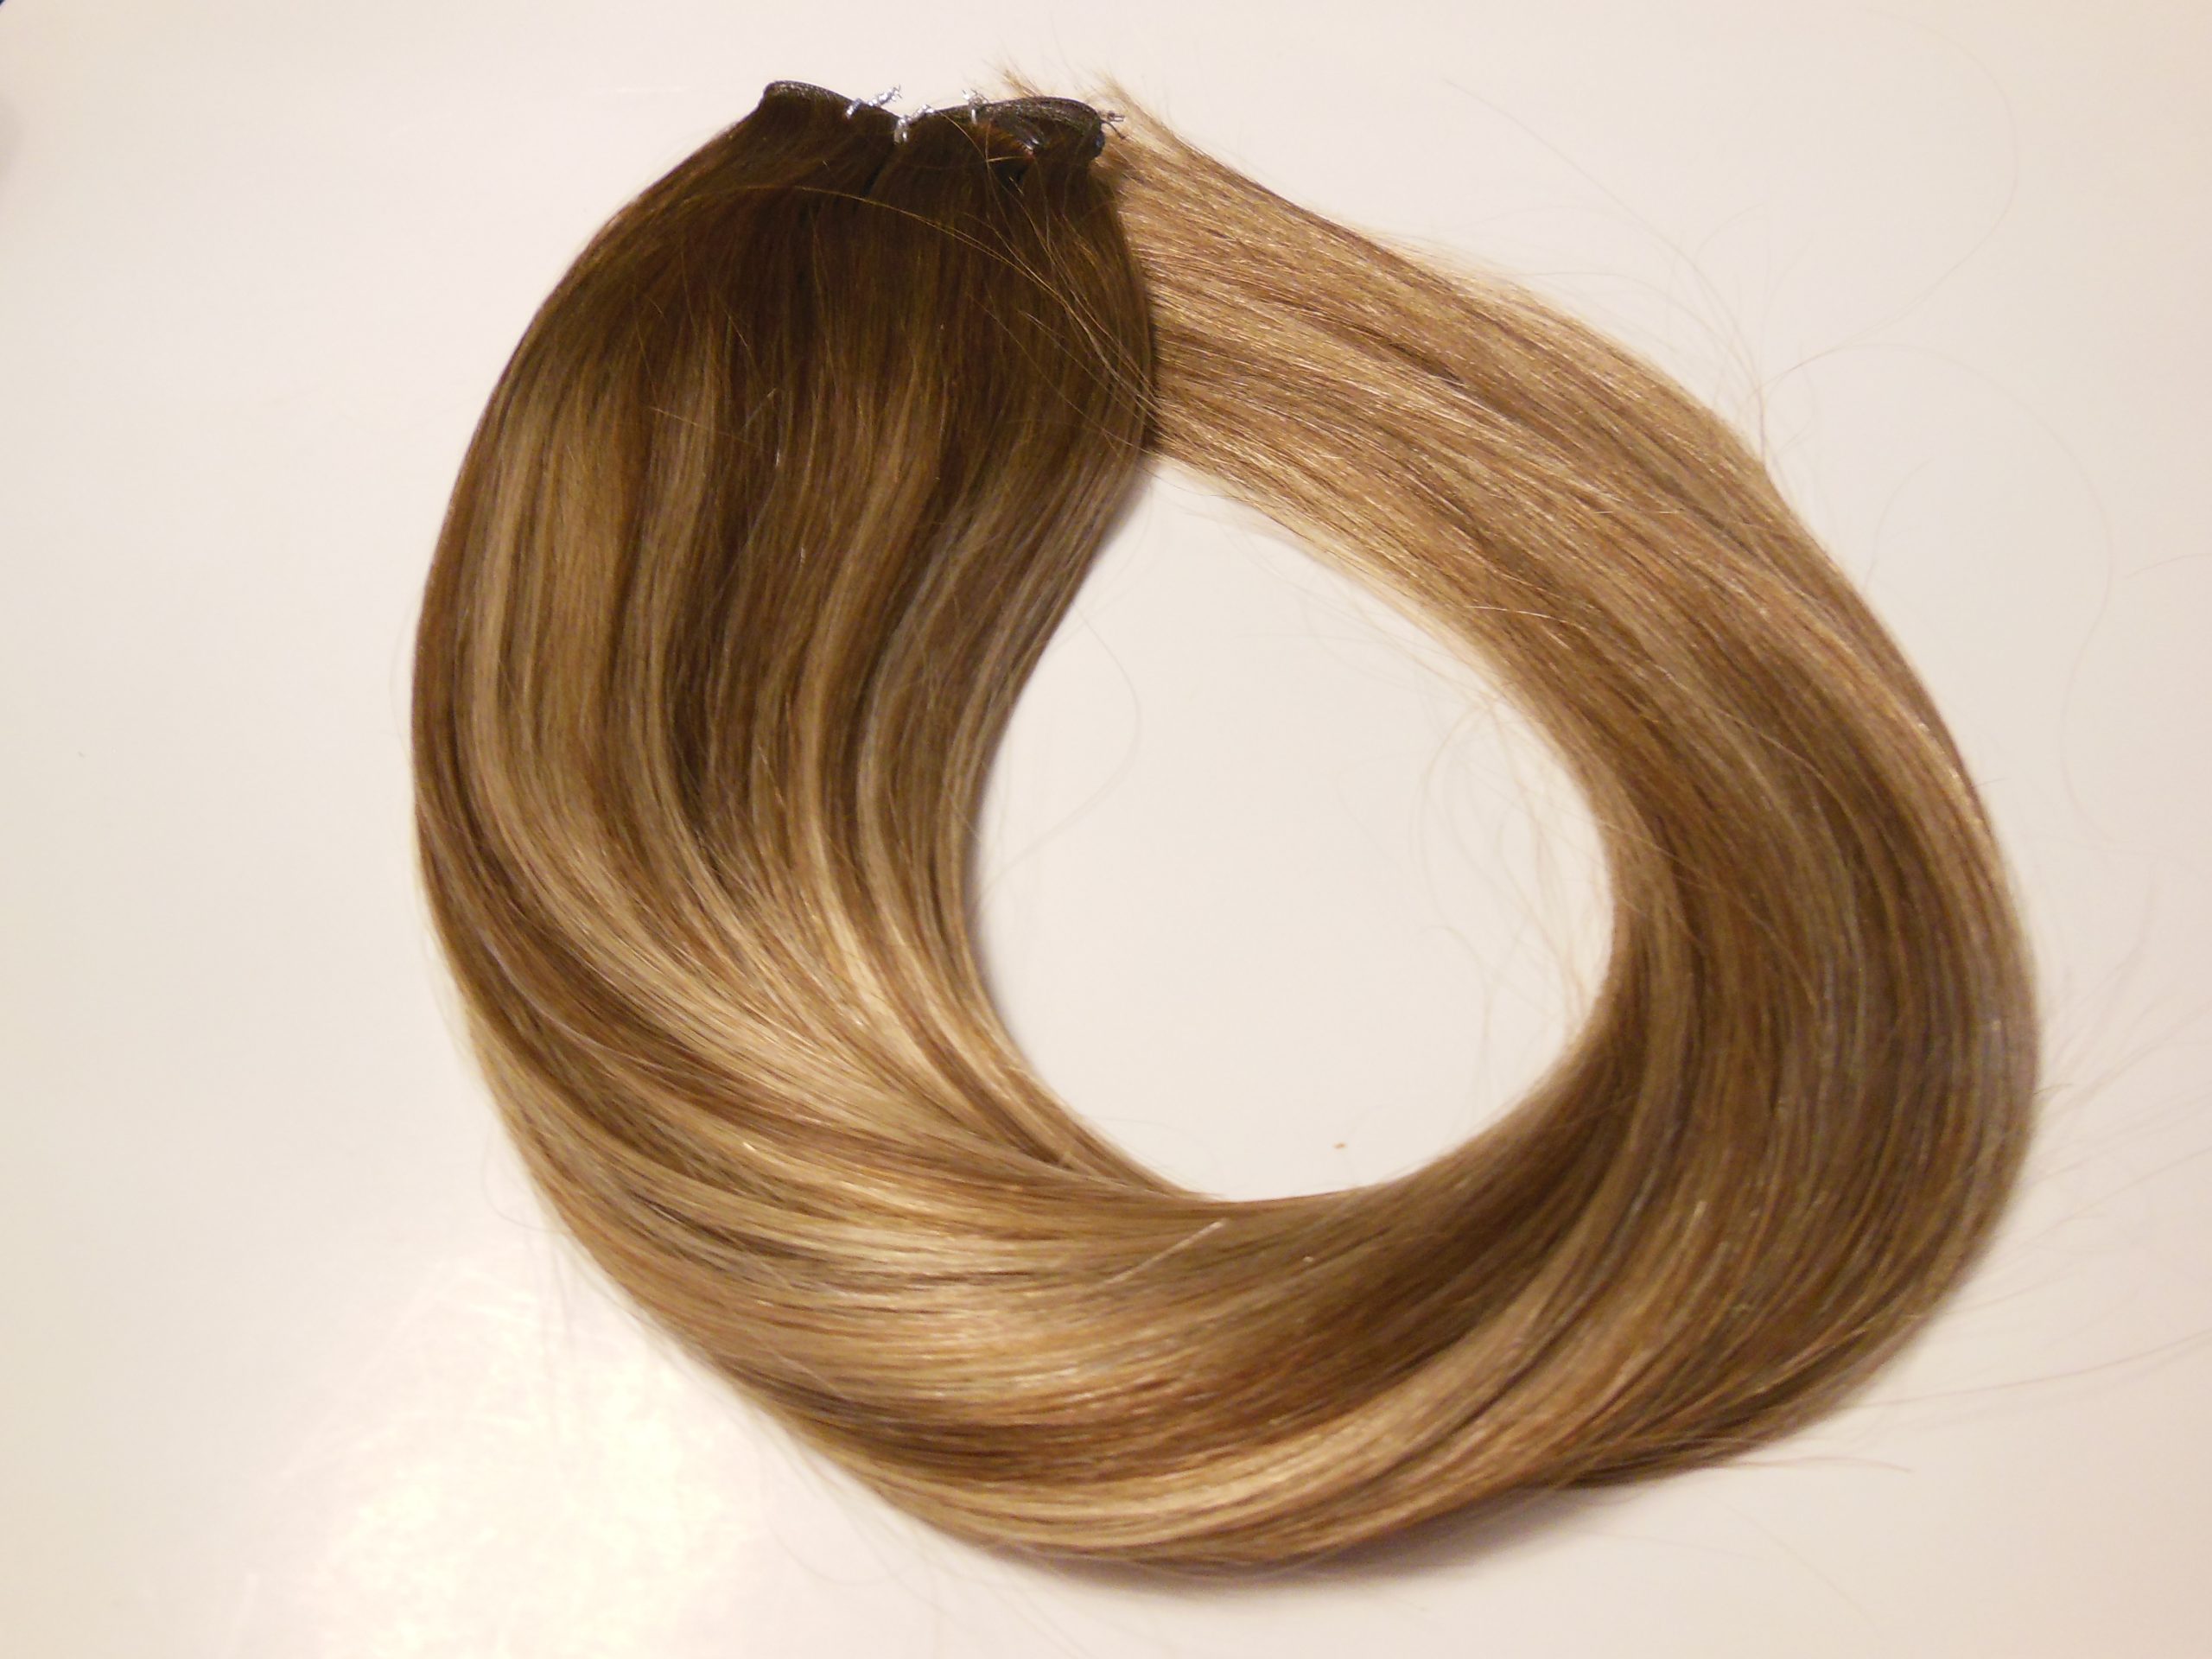 4. "Curly Blonde Hair Weft" by Hair Extensions.com - wide 1